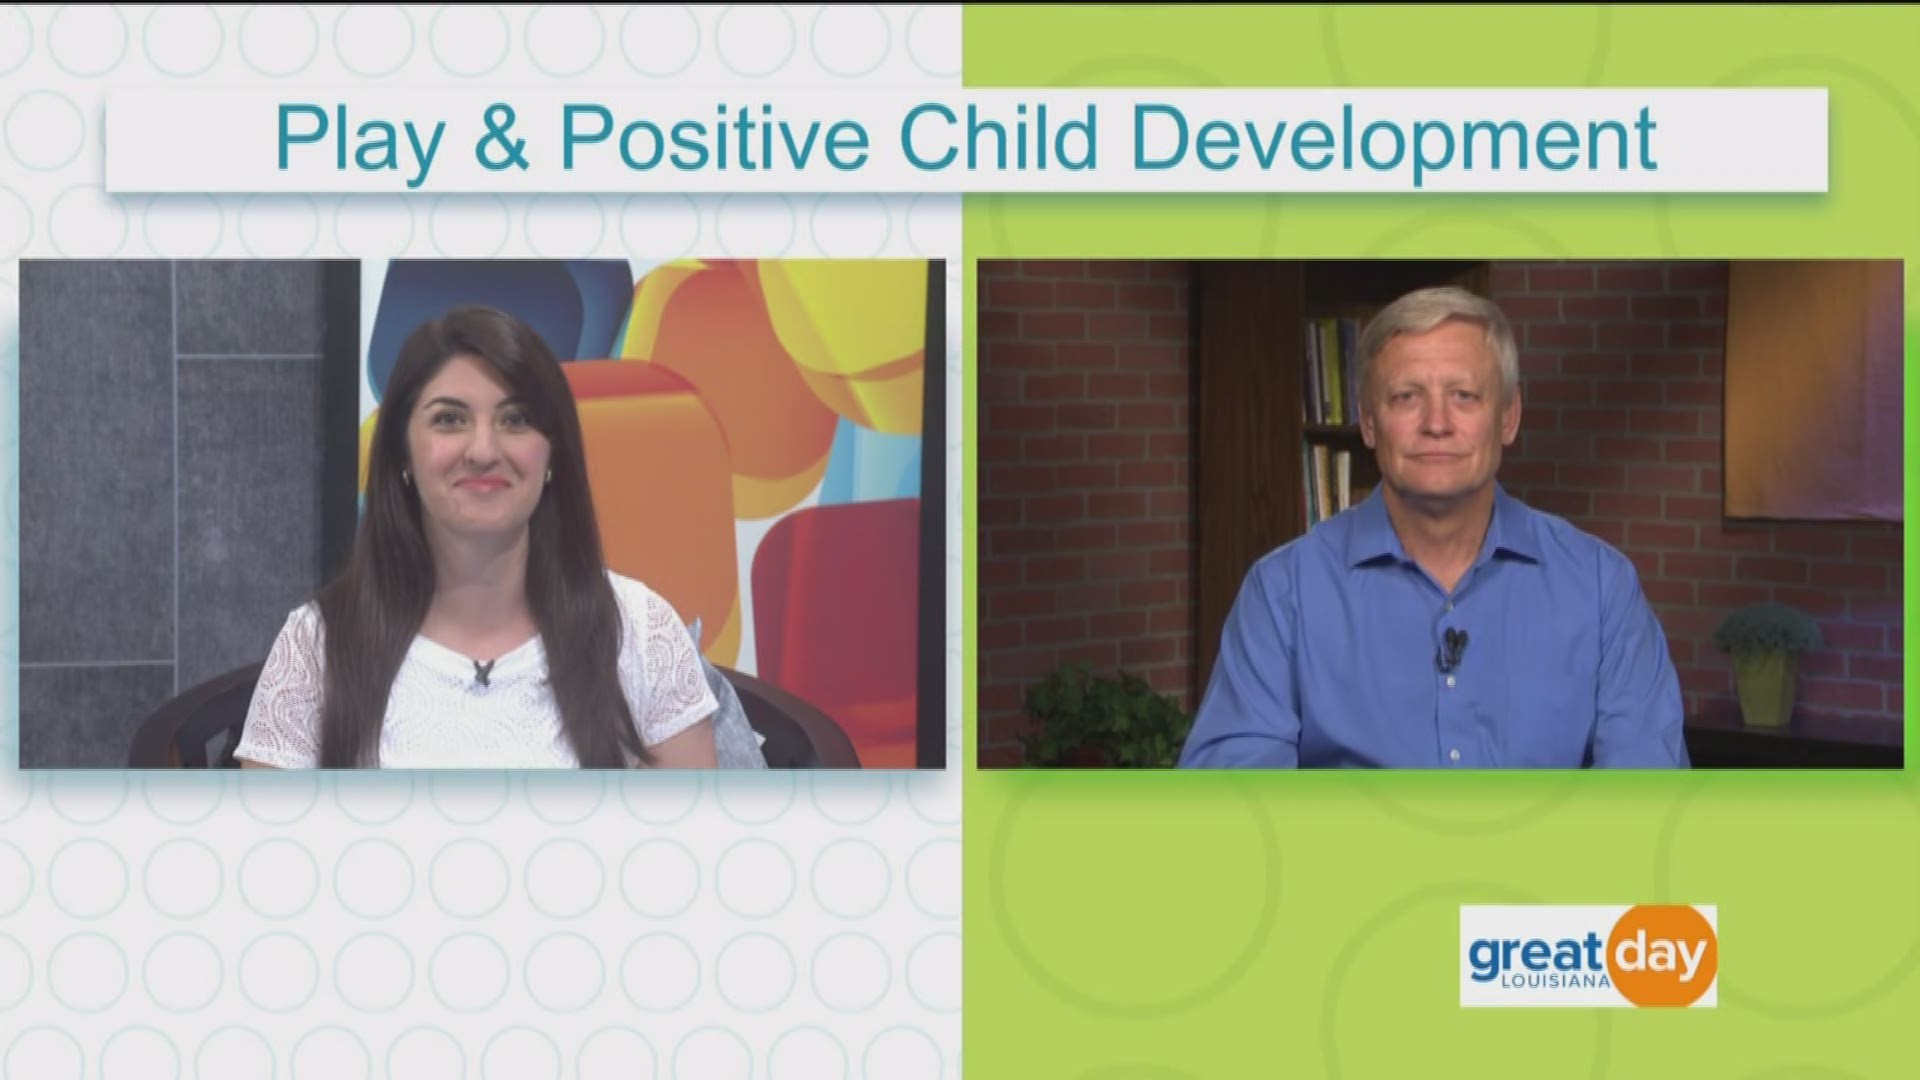 How can you help children get the most out of playtime? New research done by Children's Hospital ties certain types of play with positive developmental outcomes. Joining us with more is Dr. Michael Rich with Harvard Medical School.